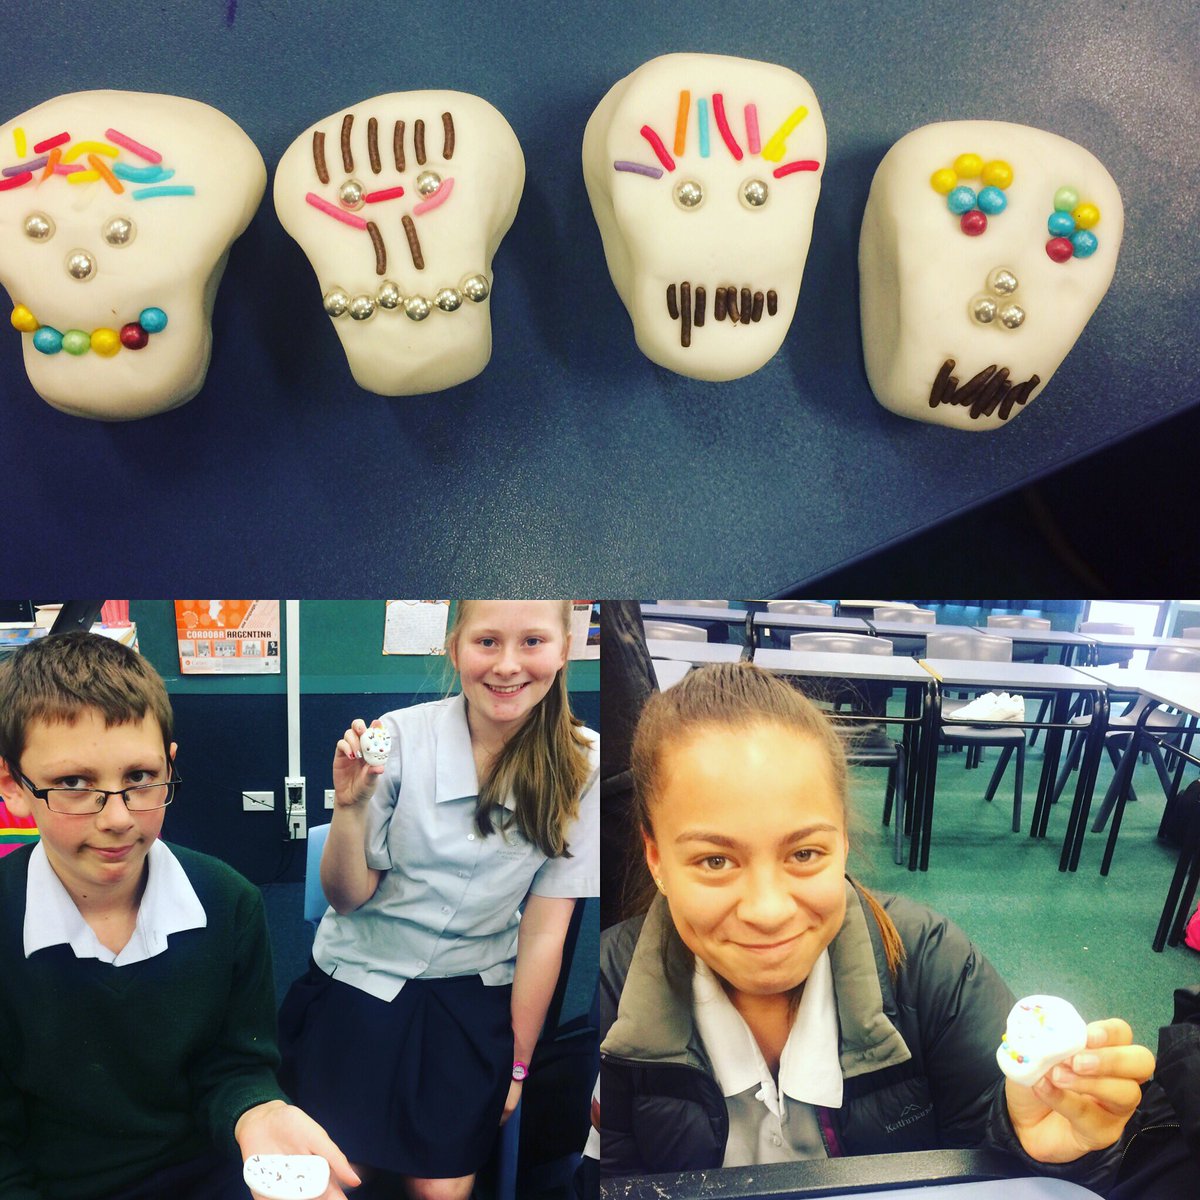 Our awesome Year 9's making some sugar skulls for #Diadelosmuertos 💀 #calaveras #azucar #dayofthedead @pcprincipal